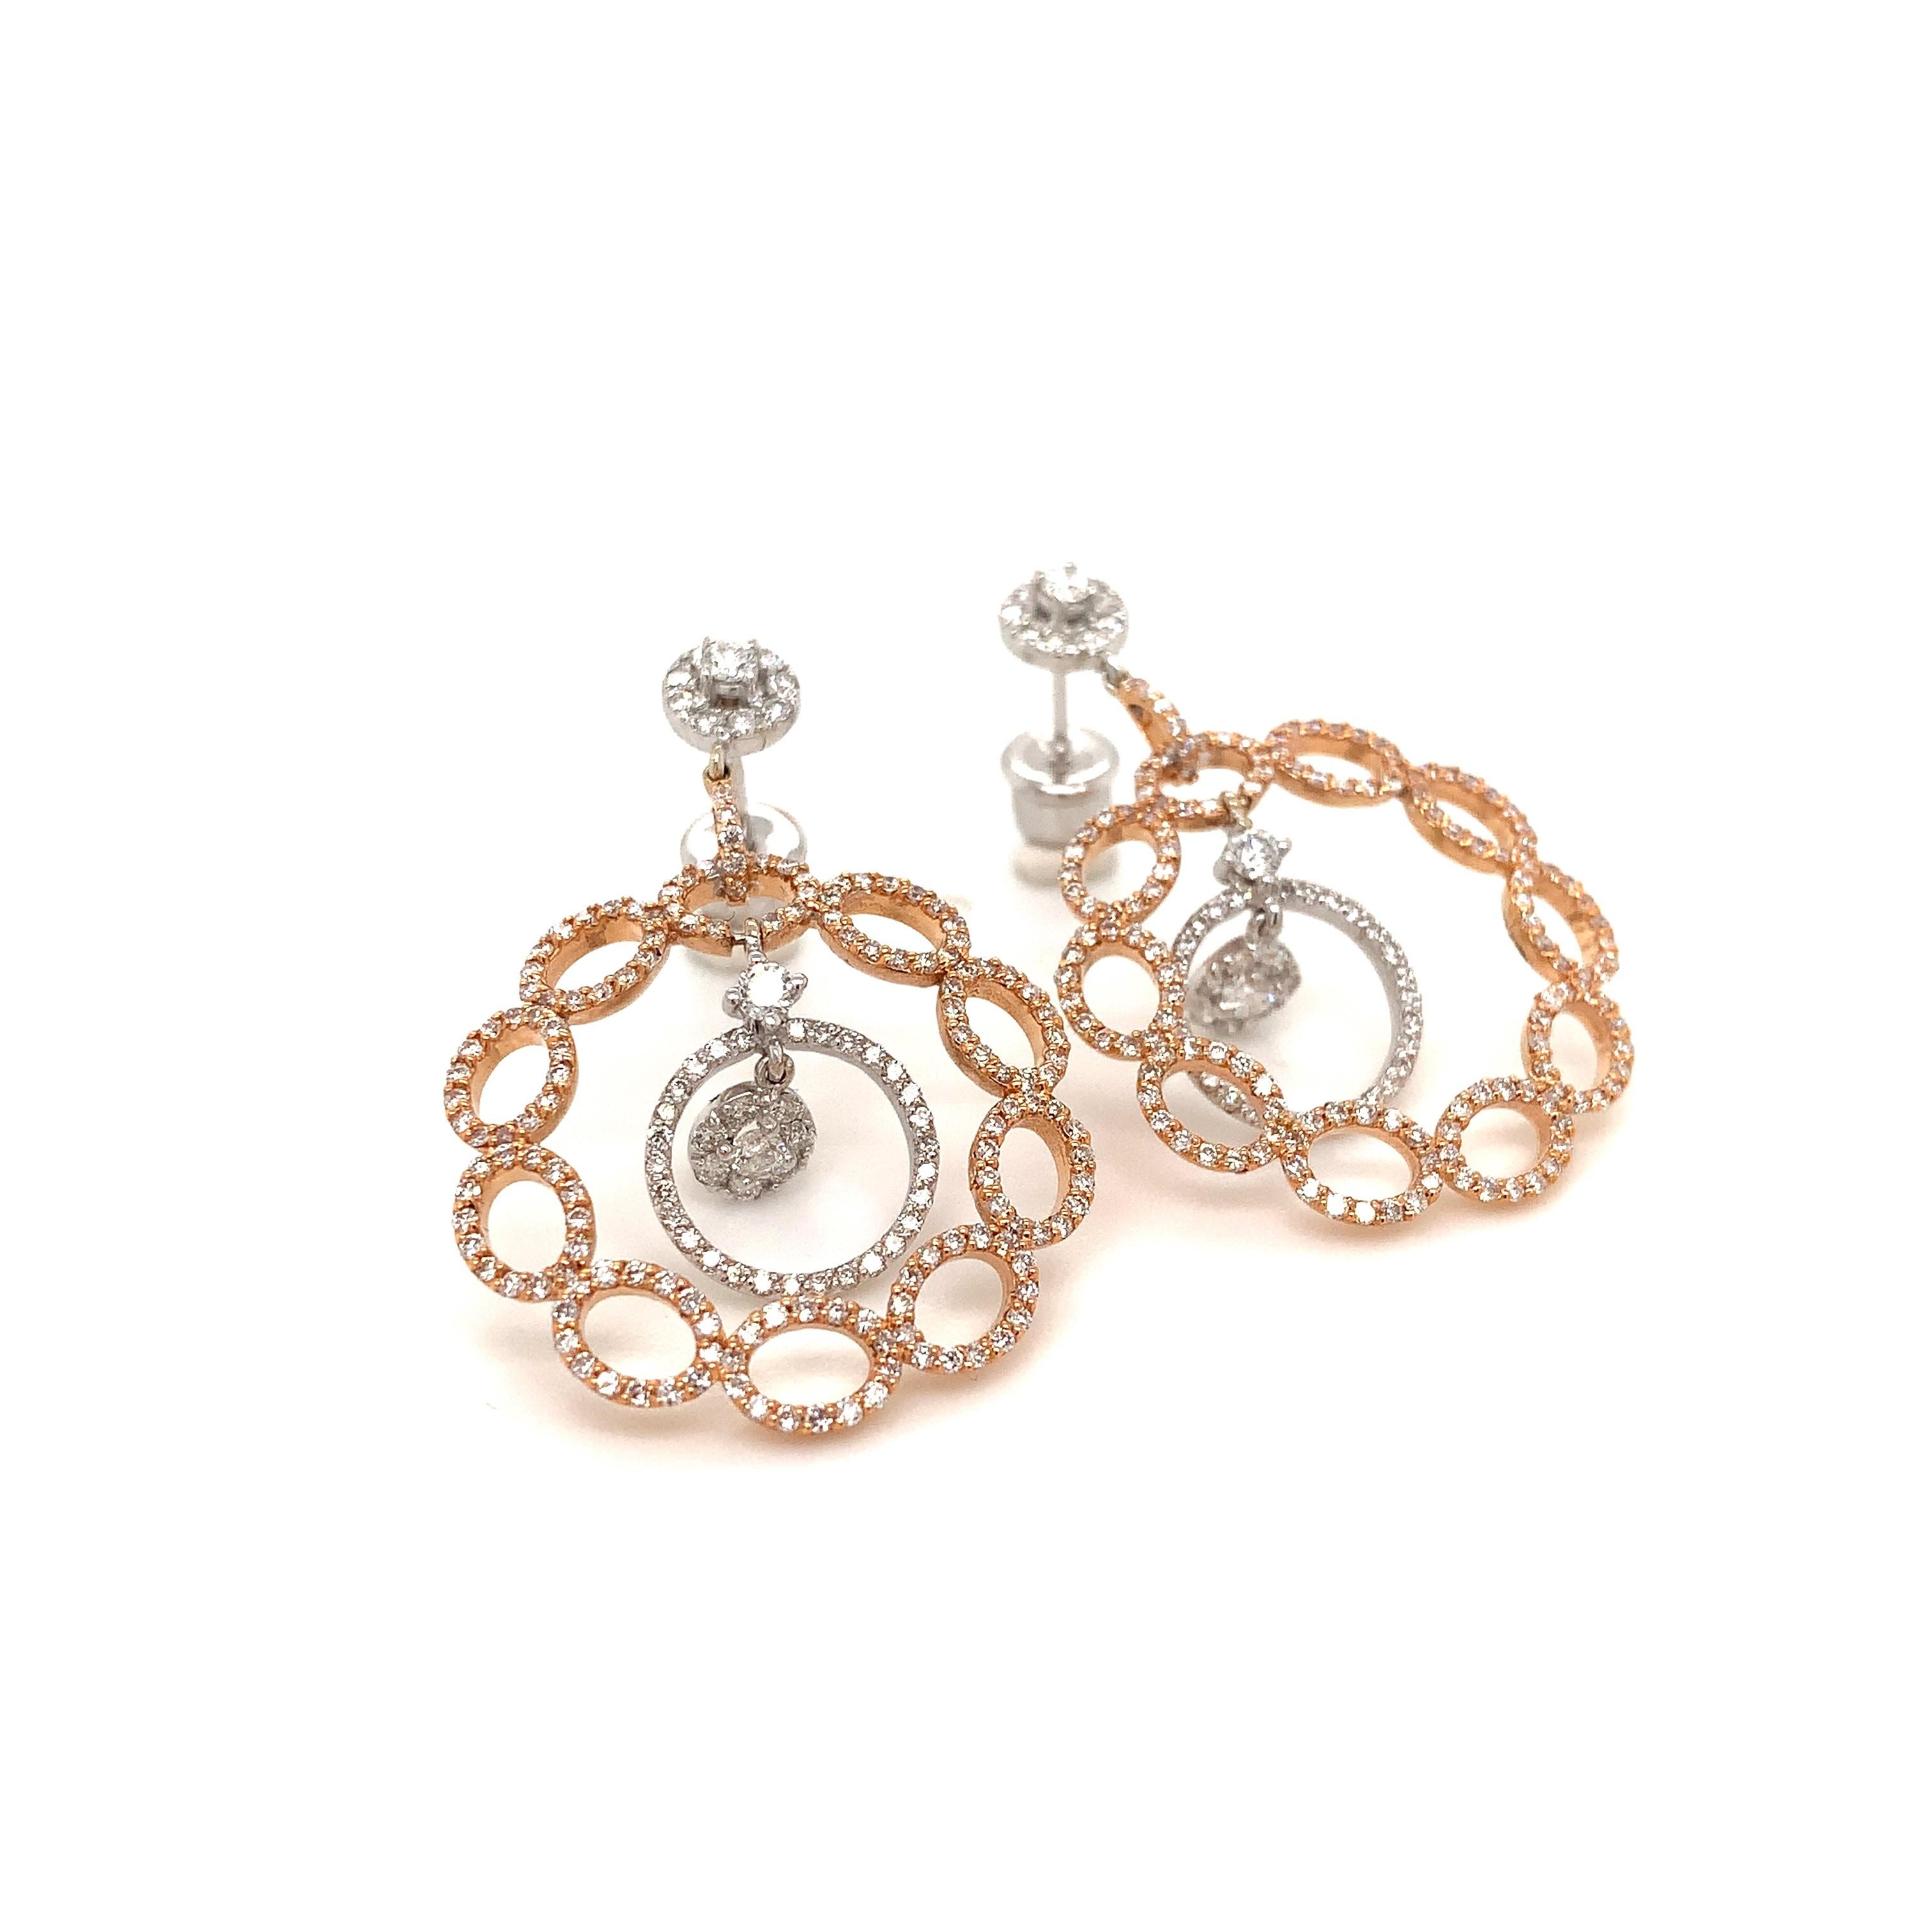 OWN Your Story 18K Rose Gold Diamond Studded Dangling 3 Distinctive Layered Earrings

OWN Your Story brings its 3 generations of family tradition and unparalleled experience with 18K gold, diamonds, and gemstones to create high-level jewelry